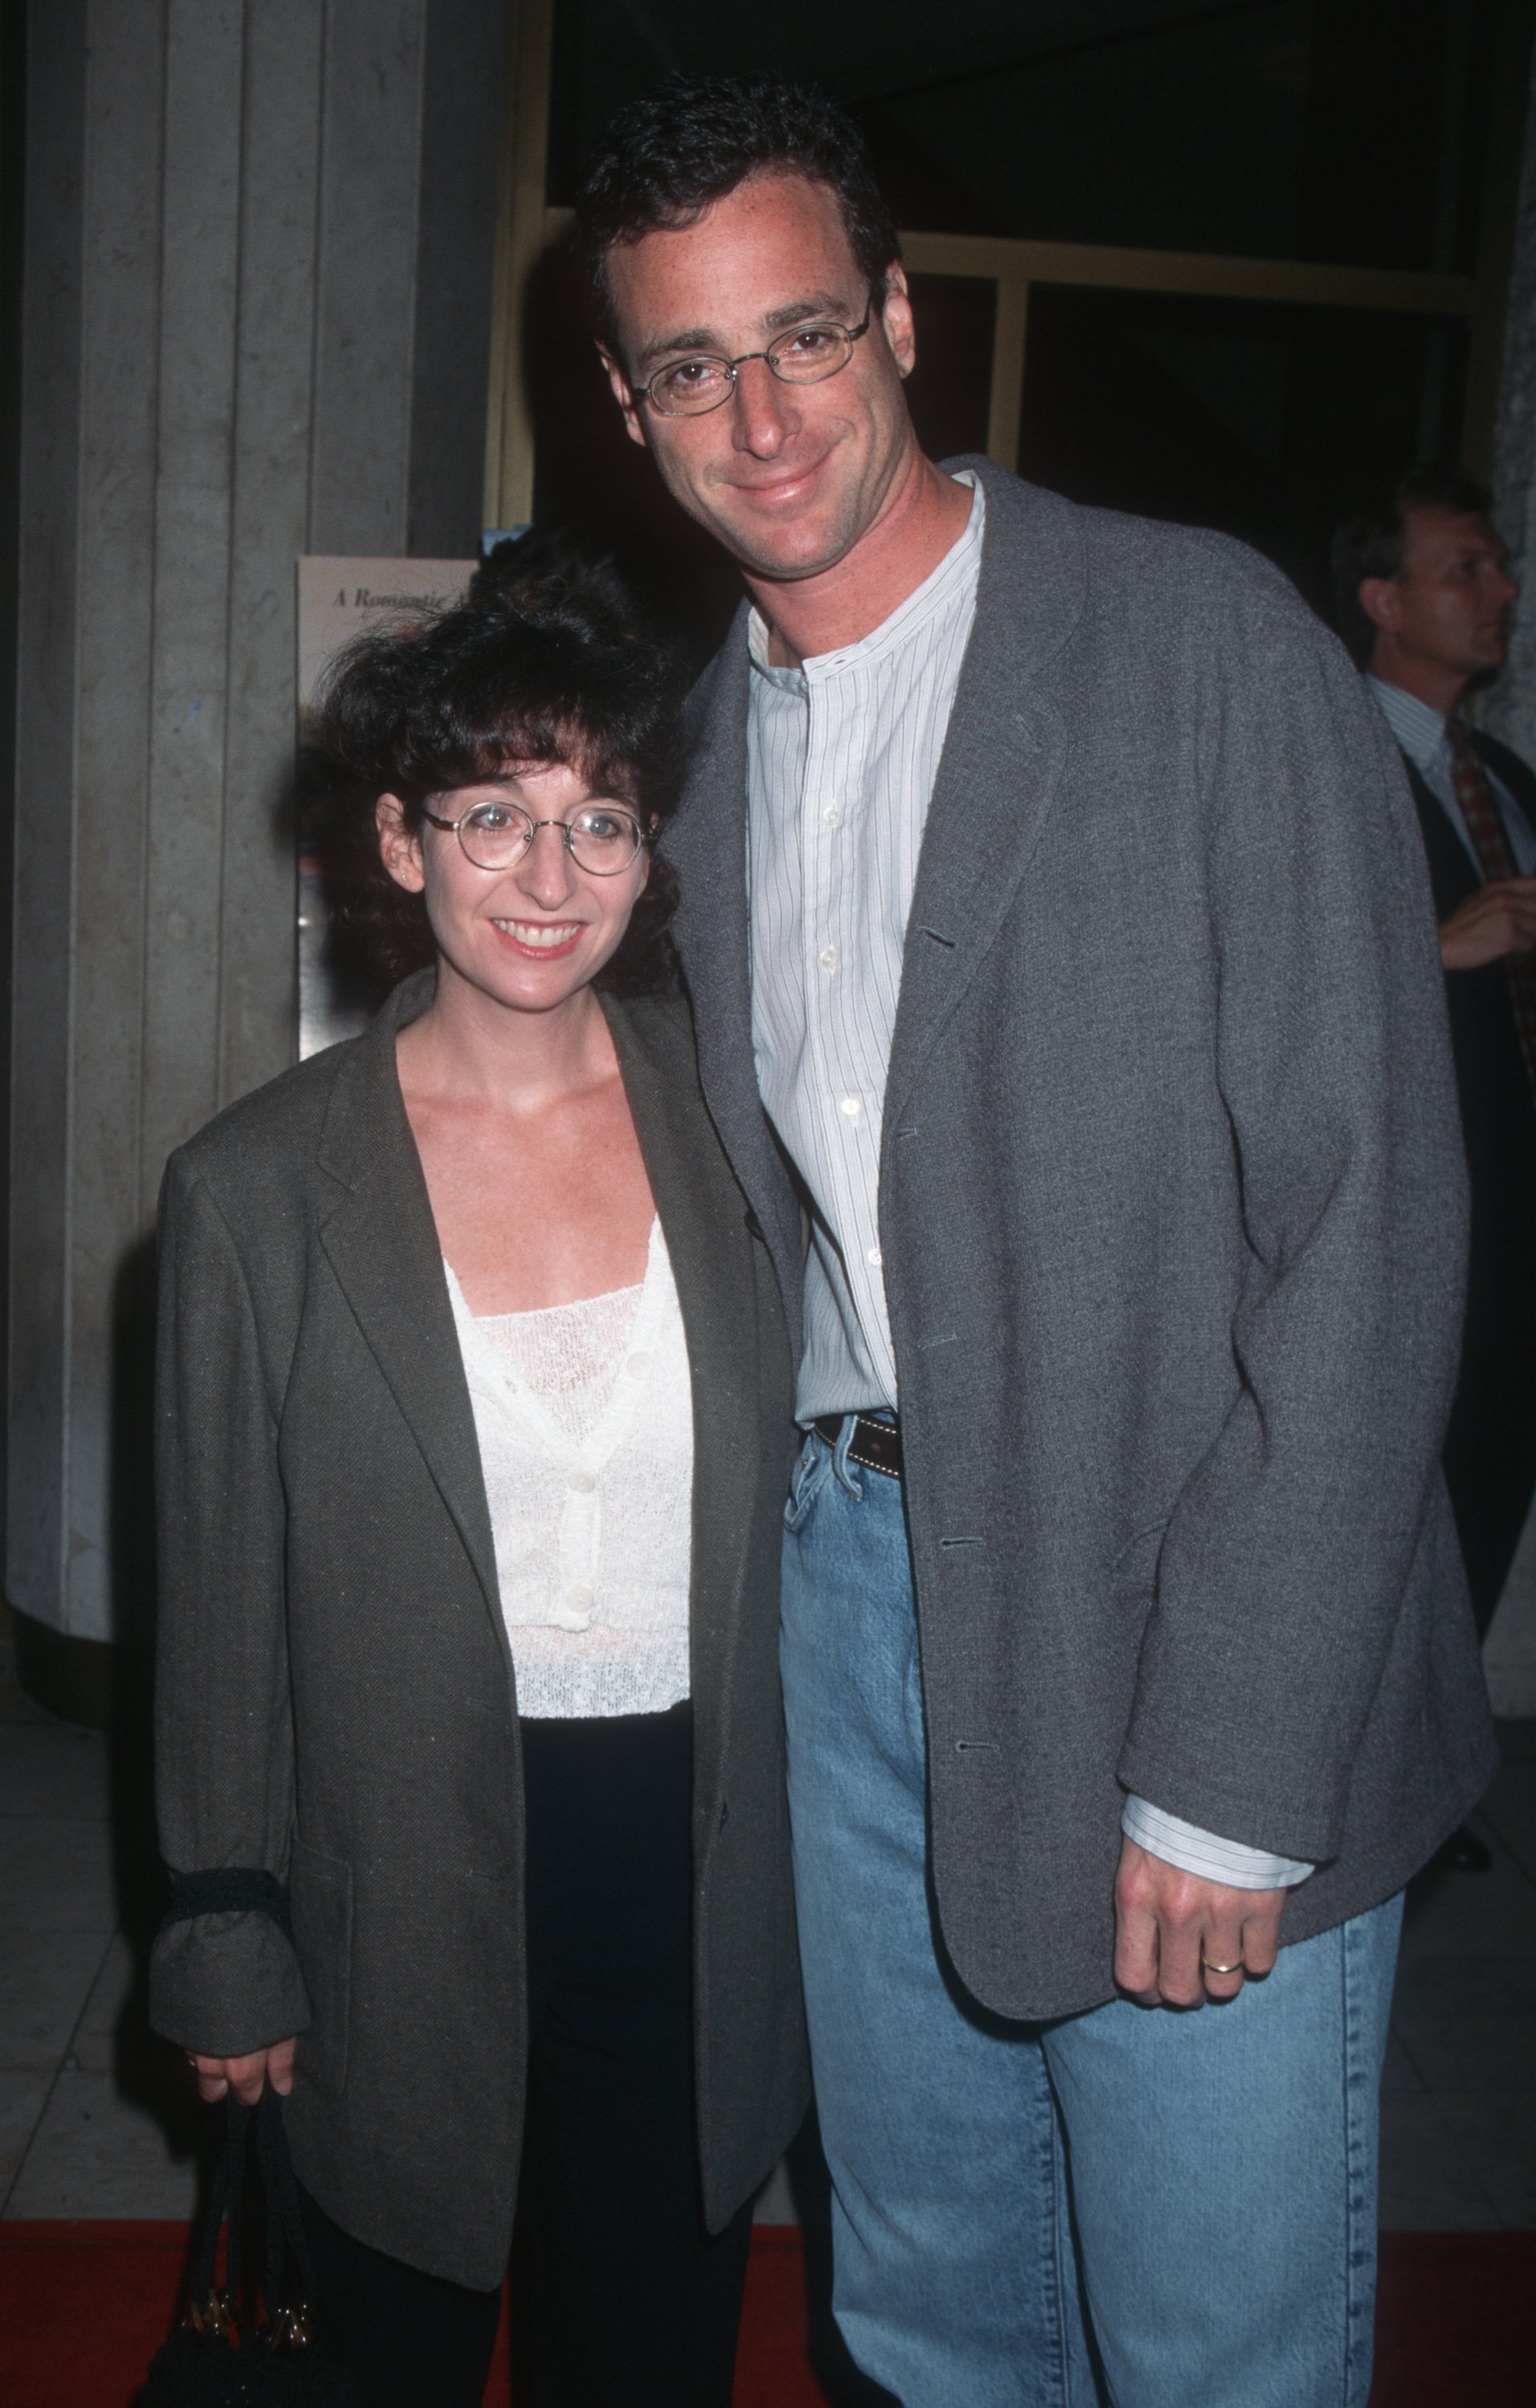 Bob Saget and Sherri Kramer attend the premiere of "Steal Big-Steal Little" on September 19, 1995, at Mann National Theater in Westwood, California. | Source: Getty Images